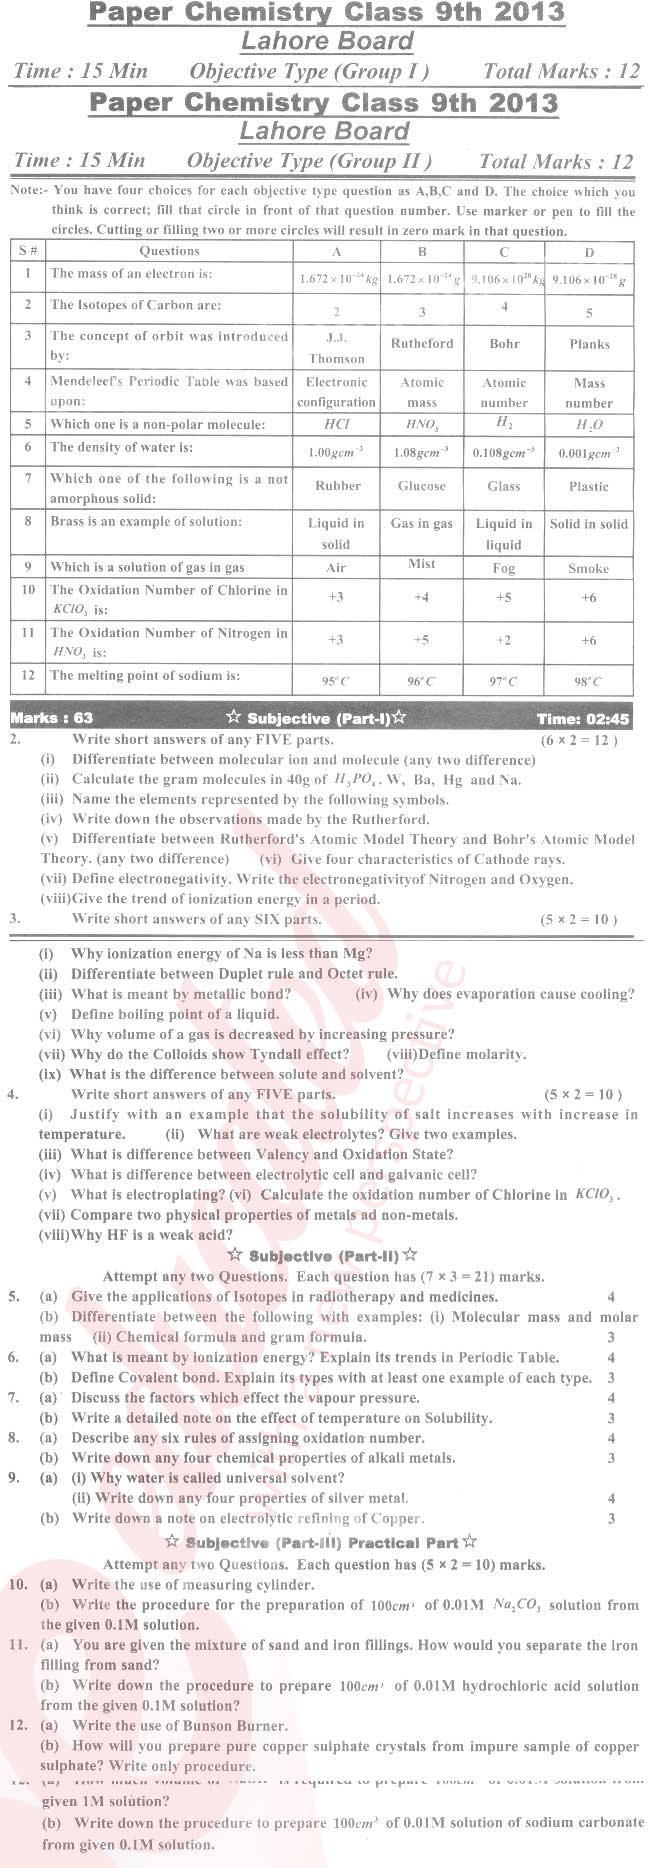 Chemistry 9th English Medium Past Paper Group 2 BISE Lahore 2013